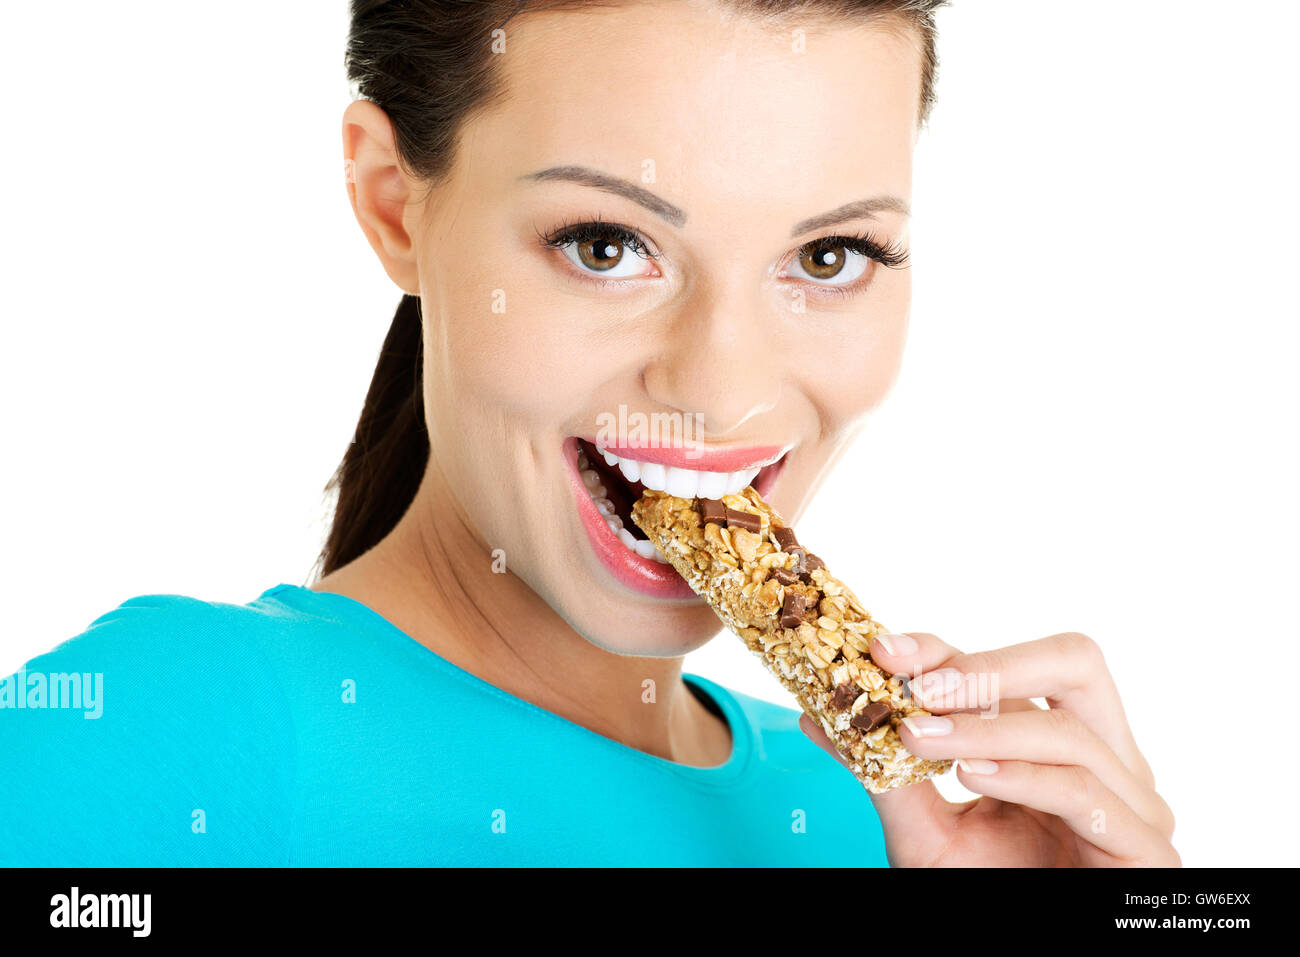 Young woman eating cereal candy bar Stock Photo